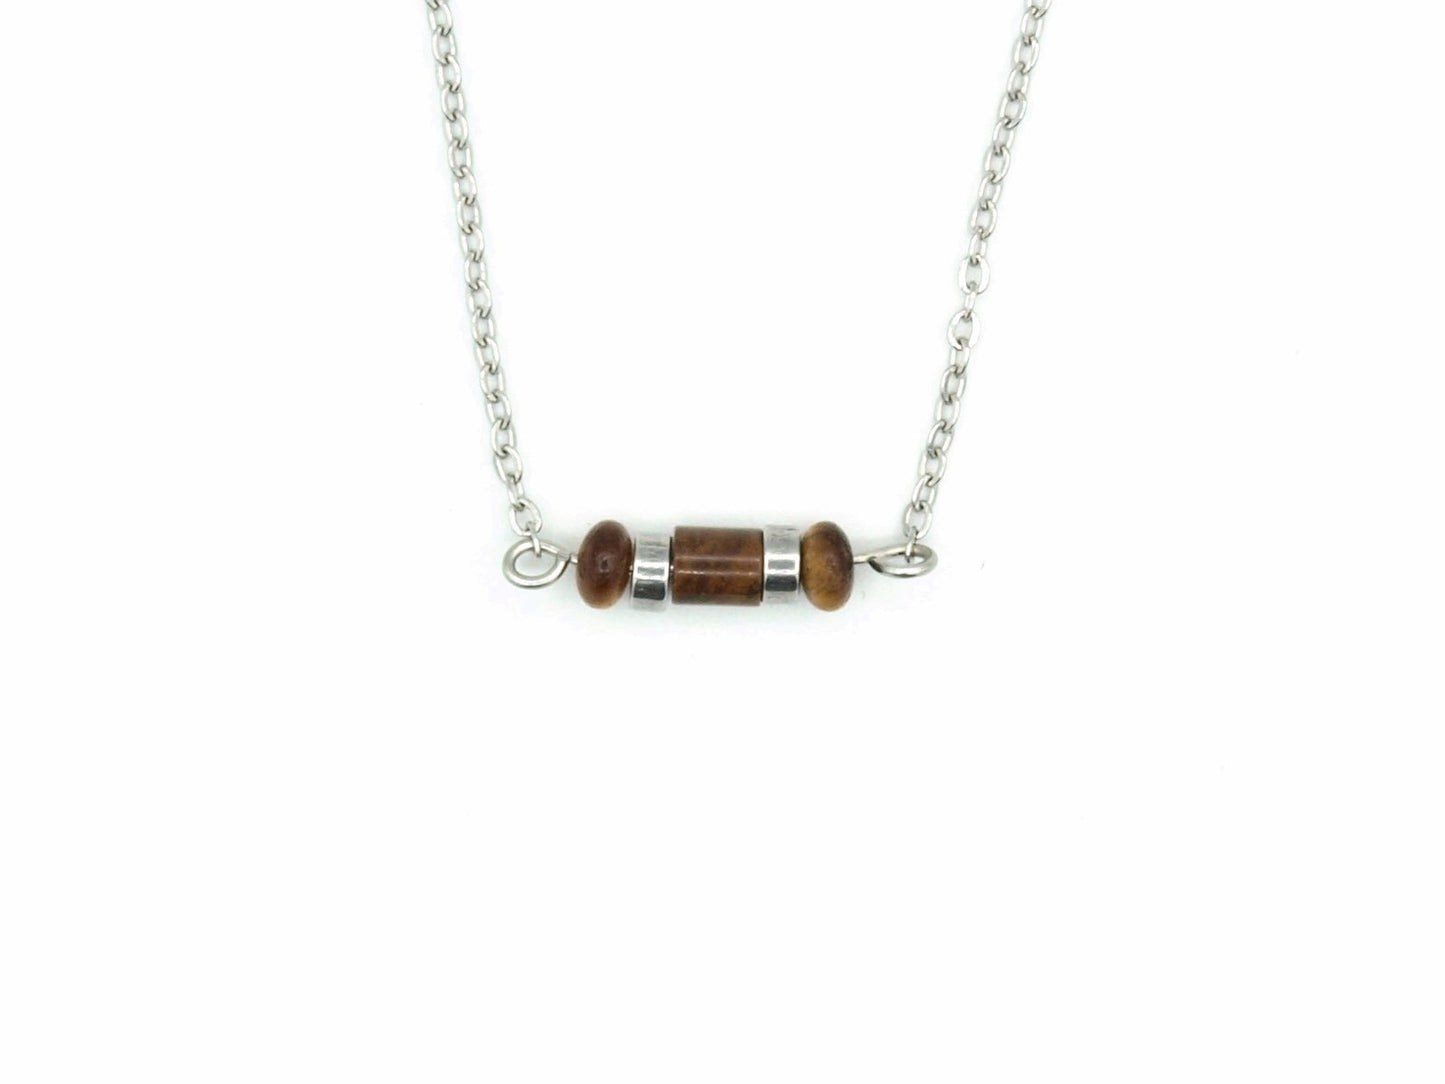 Necklace Iris tiger's eye, silver and gold stainless steel